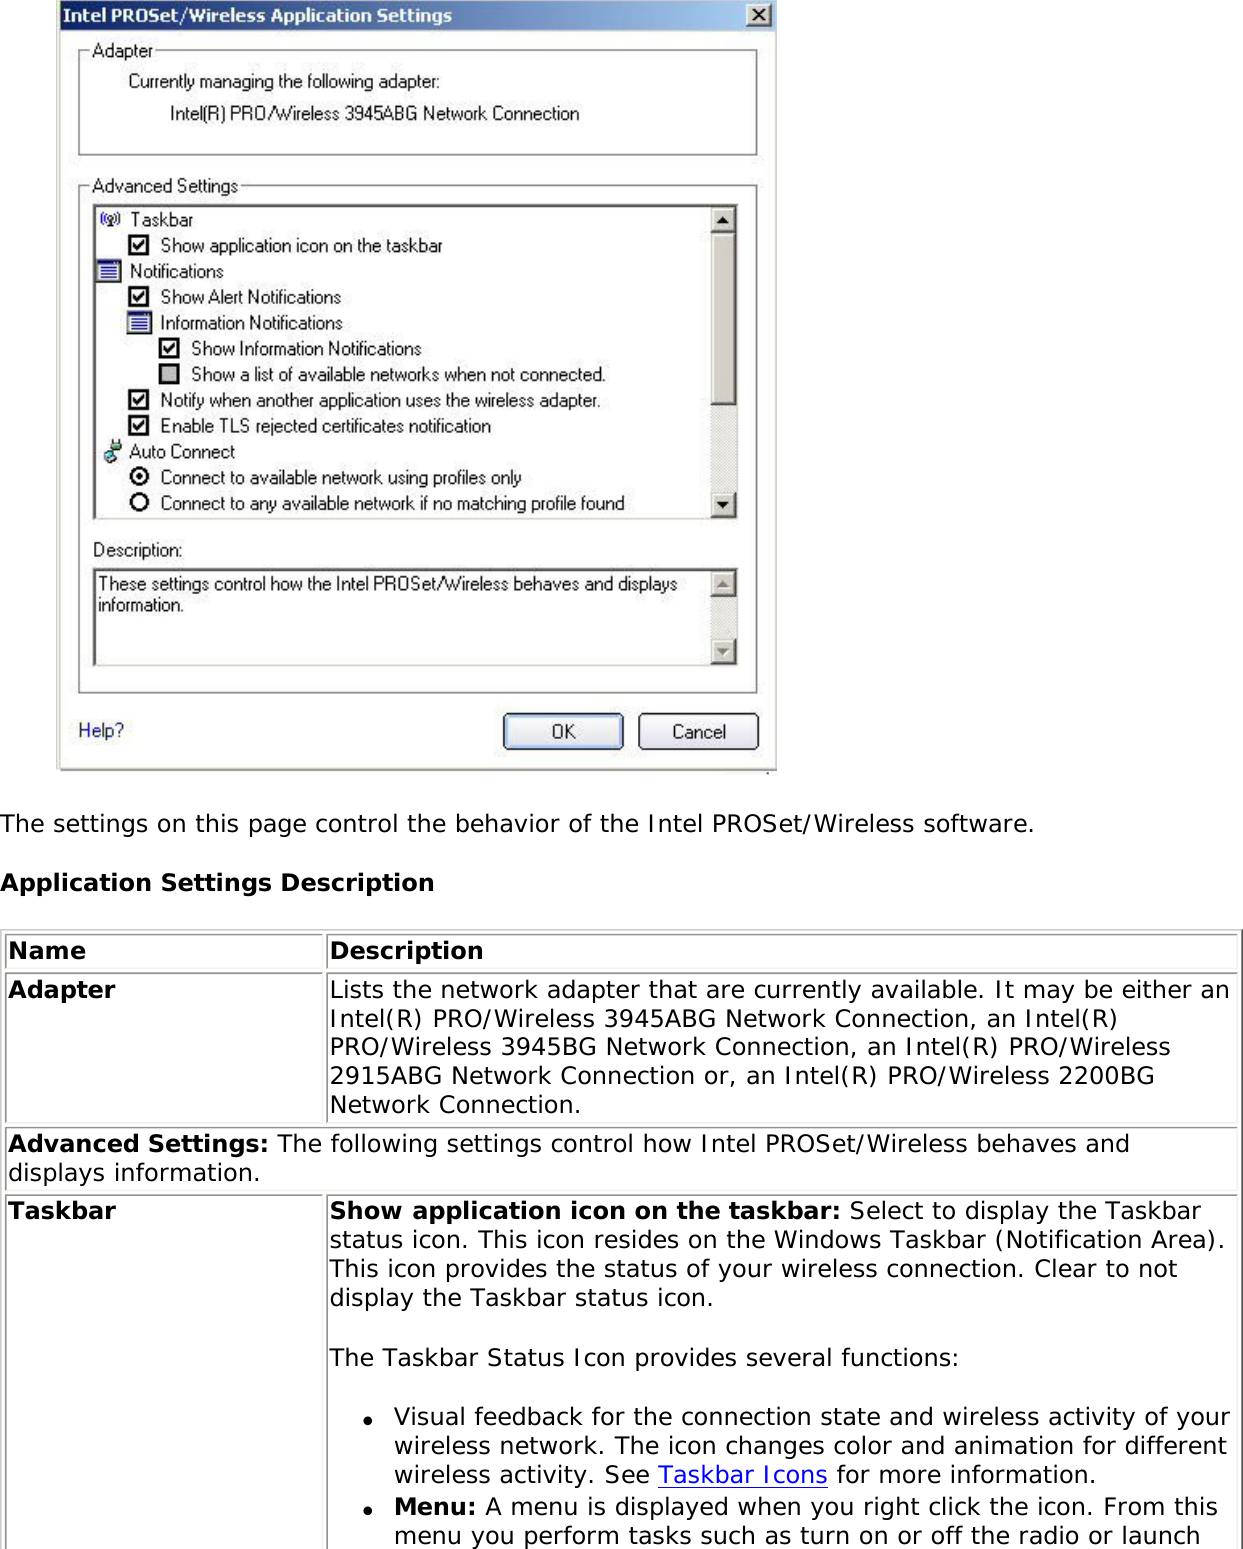  The settings on this page control the behavior of the Intel PROSet/Wireless software. Application Settings DescriptionName DescriptionAdapter Lists the network adapter that are currently available. It may be either an Intel(R) PRO/Wireless 3945ABG Network Connection, an Intel(R) PRO/Wireless 3945BG Network Connection, an Intel(R) PRO/Wireless 2915ABG Network Connection or, an Intel(R) PRO/Wireless 2200BG Network Connection.Advanced Settings: The following settings control how Intel PROSet/Wireless behaves and displays information. Taskbar Show application icon on the taskbar: Select to display the Taskbar status icon. This icon resides on the Windows Taskbar (Notification Area). This icon provides the status of your wireless connection. Clear to not display the Taskbar status icon. The Taskbar Status Icon provides several functions: ●     Visual feedback for the connection state and wireless activity of your wireless network. The icon changes color and animation for different wireless activity. See Taskbar Icons for more information.●     Menu: A menu is displayed when you right click the icon. From this menu you perform tasks such as turn on or off the radio or launch 